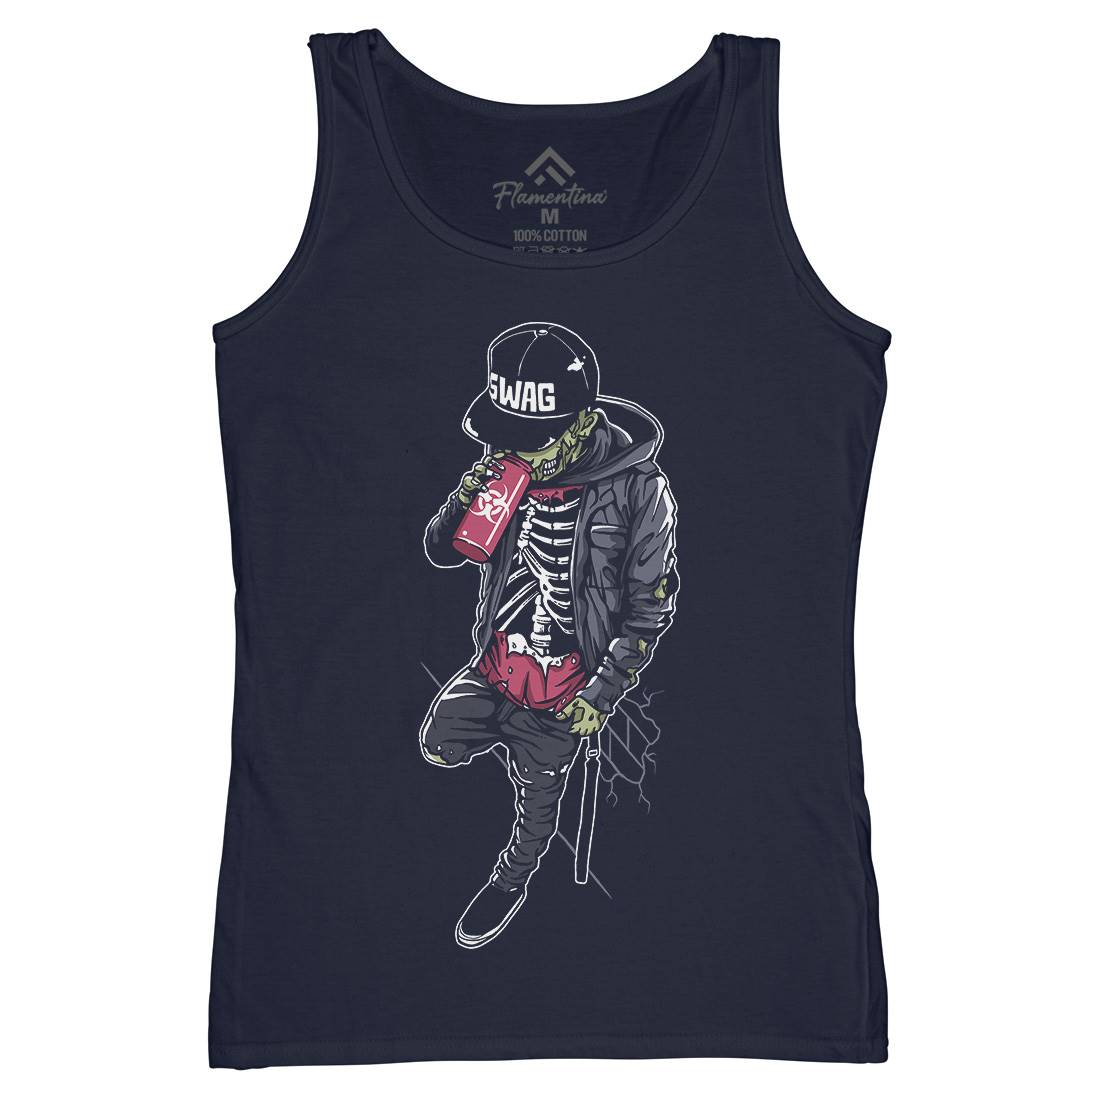 Zombie Swag Womens Organic Tank Top Vest Horror A600